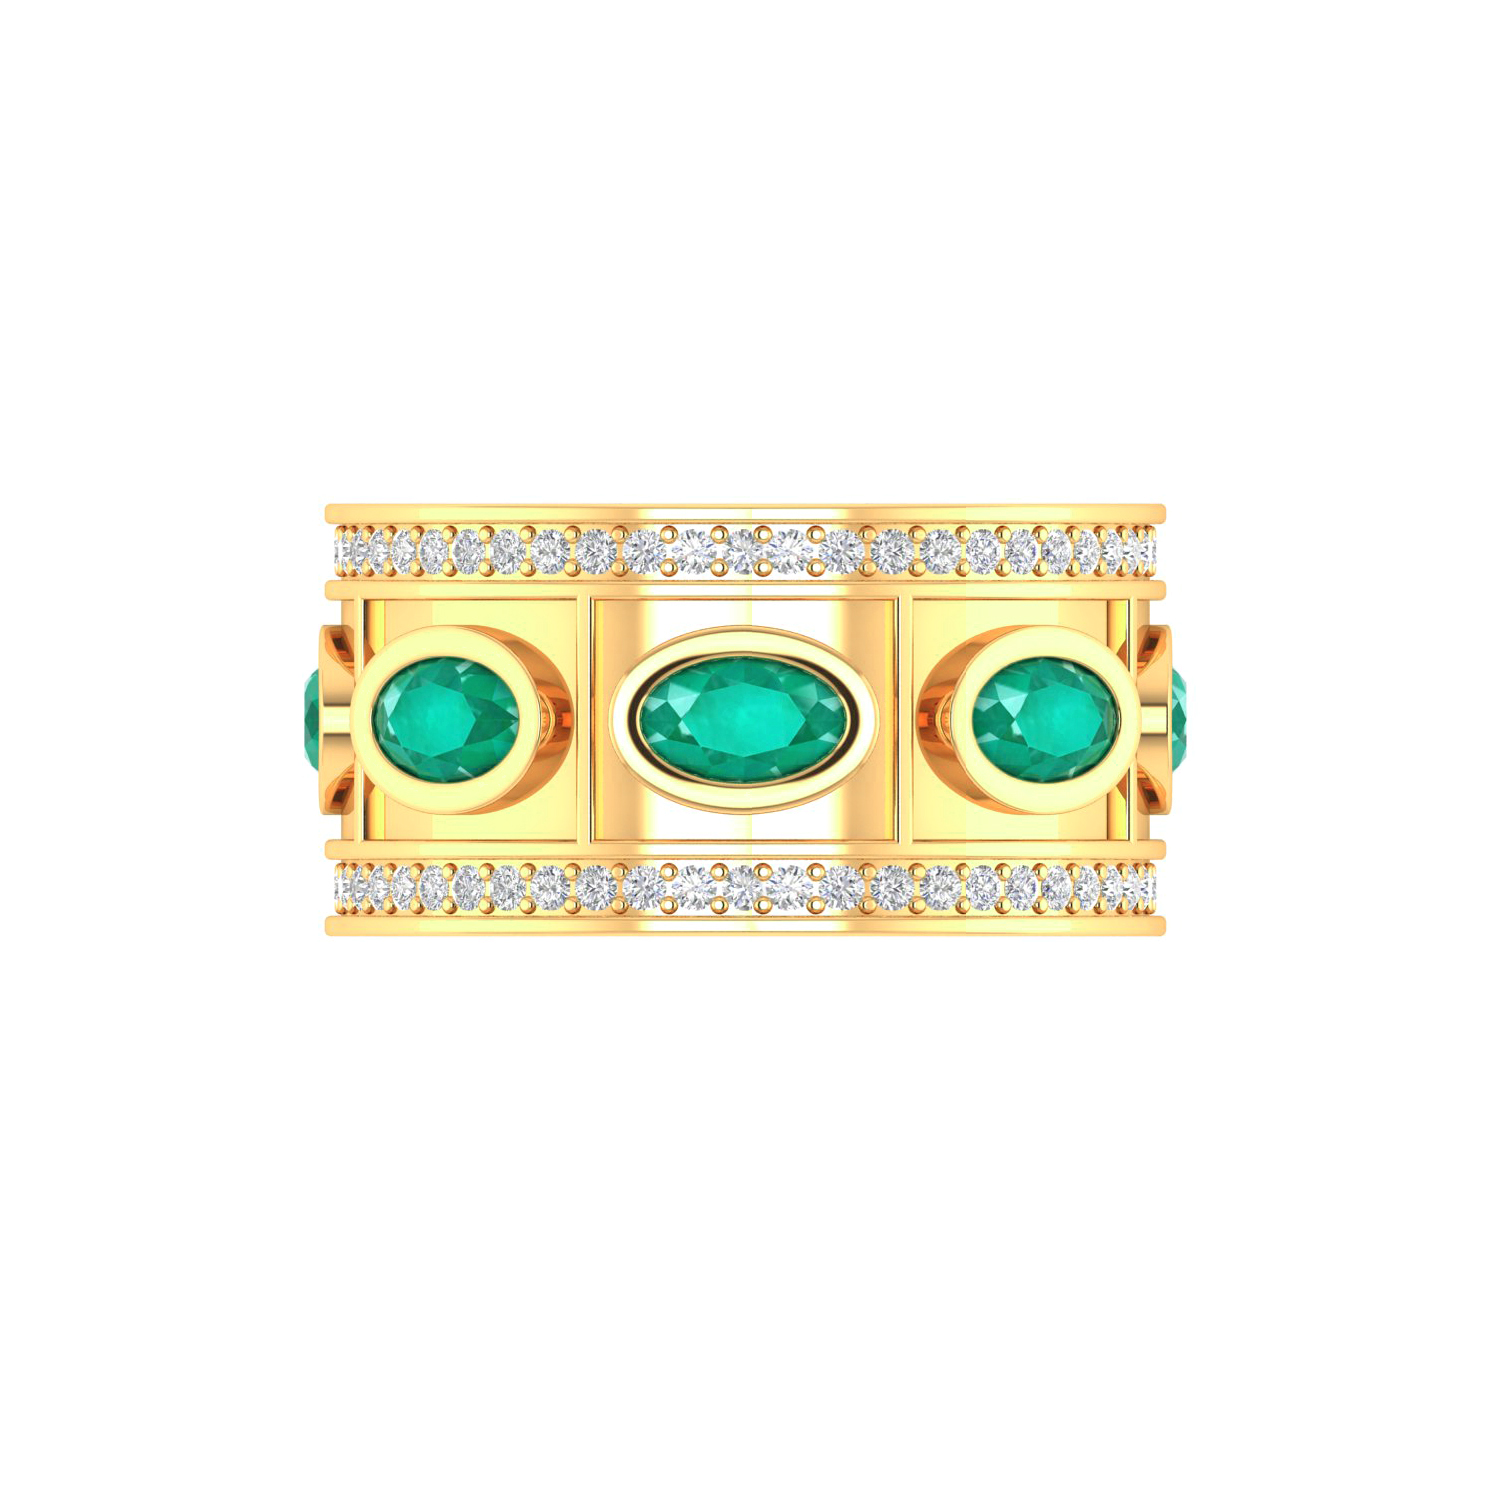 Genuine Diamond Solid Gold Emerald Band Ring